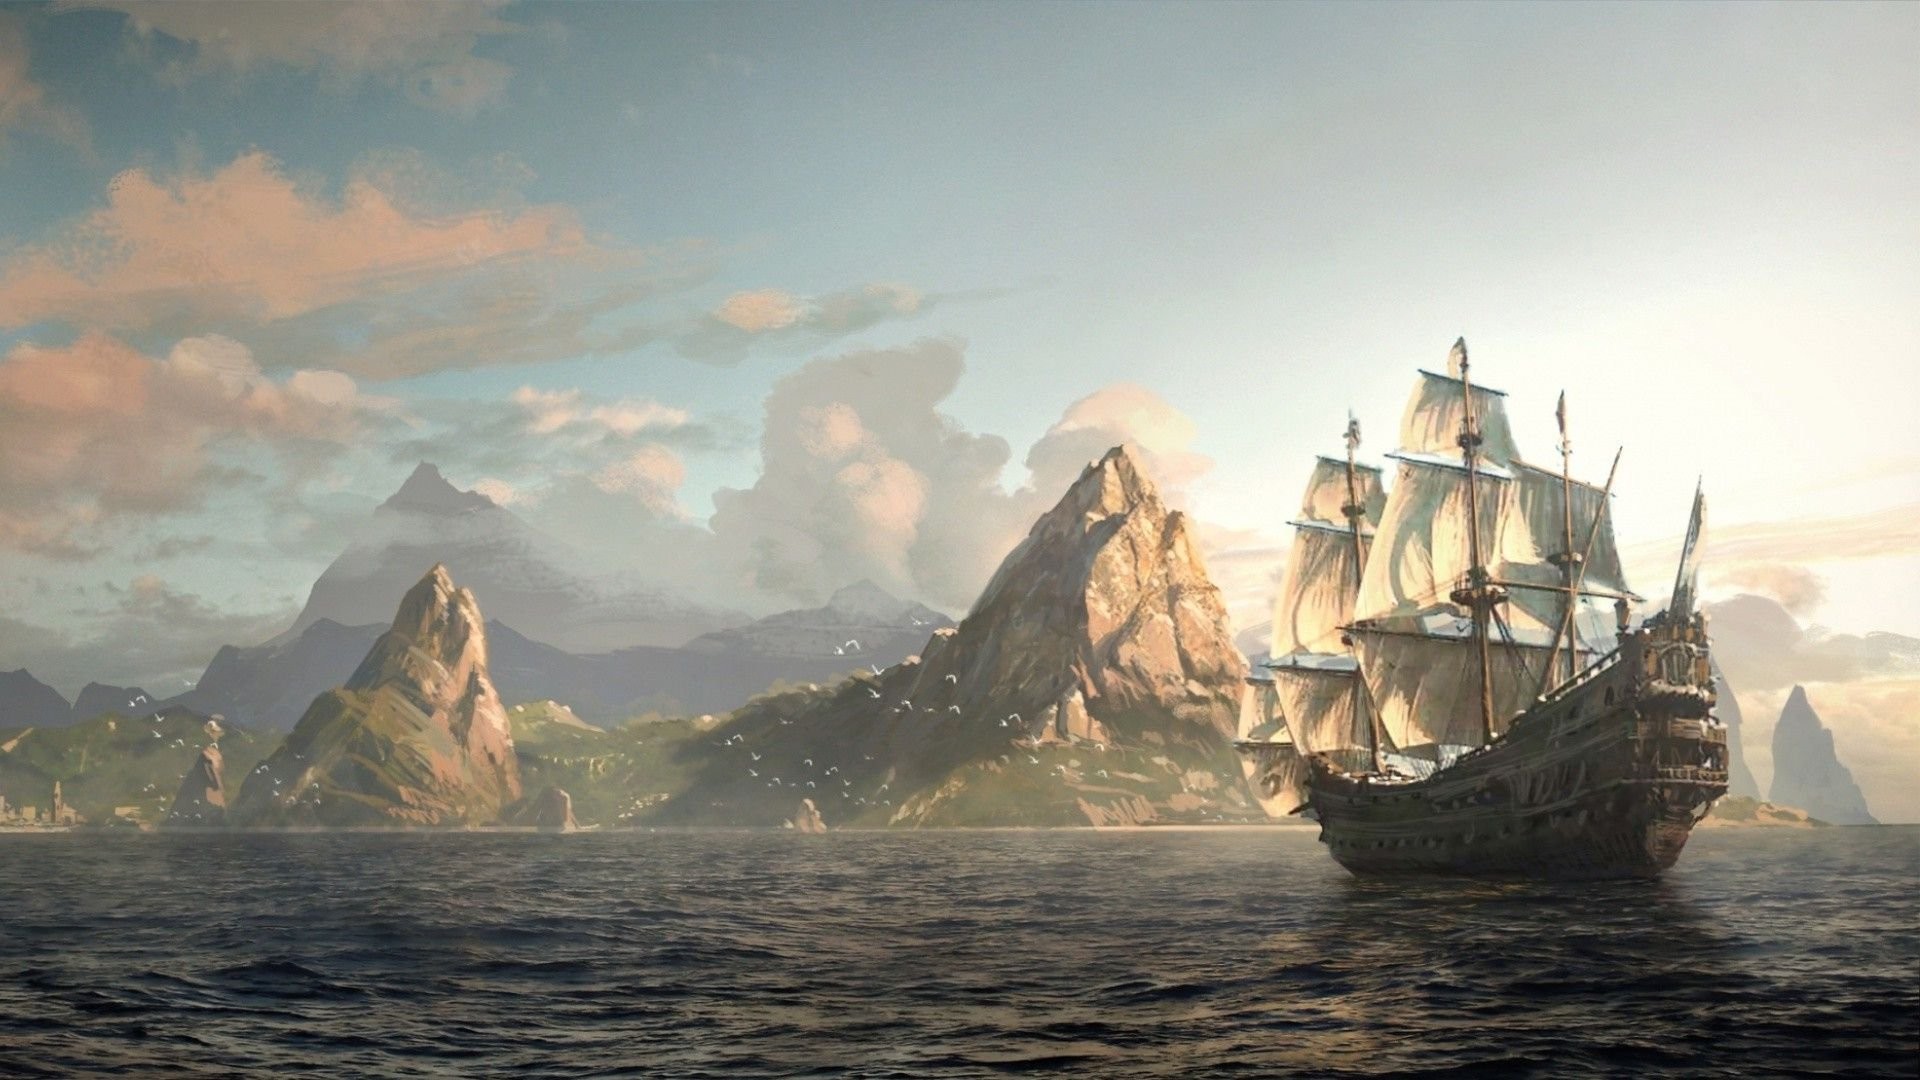 1920x1080 Download The Assassin's Creed IV Black Flag Wallpapers | GeForce ...